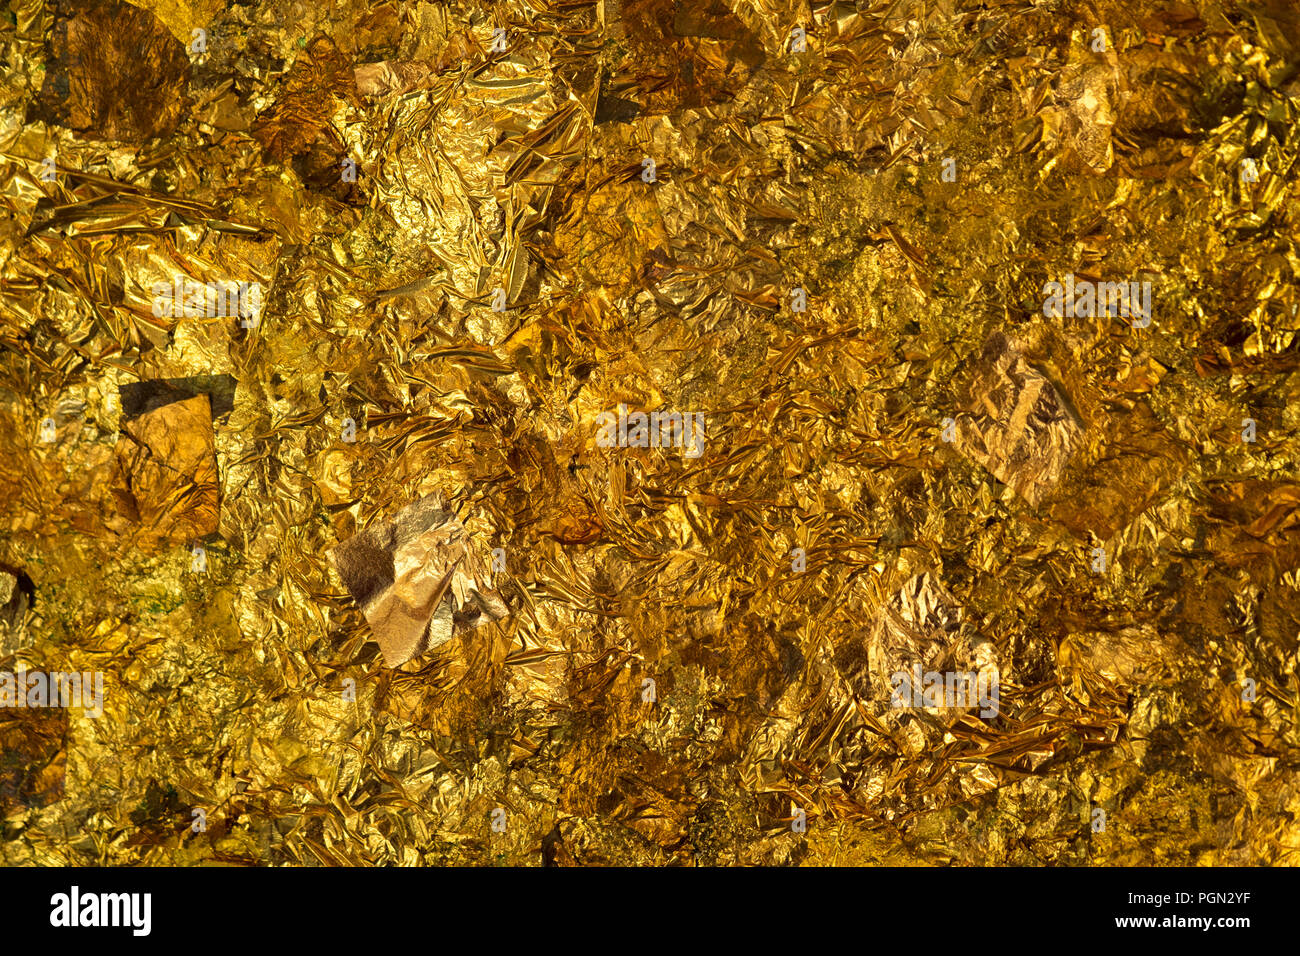 Shiny yellow gold leaf or scraps of gold foil background texture, surface  from Back of Buddha image Stock Photo - Alamy